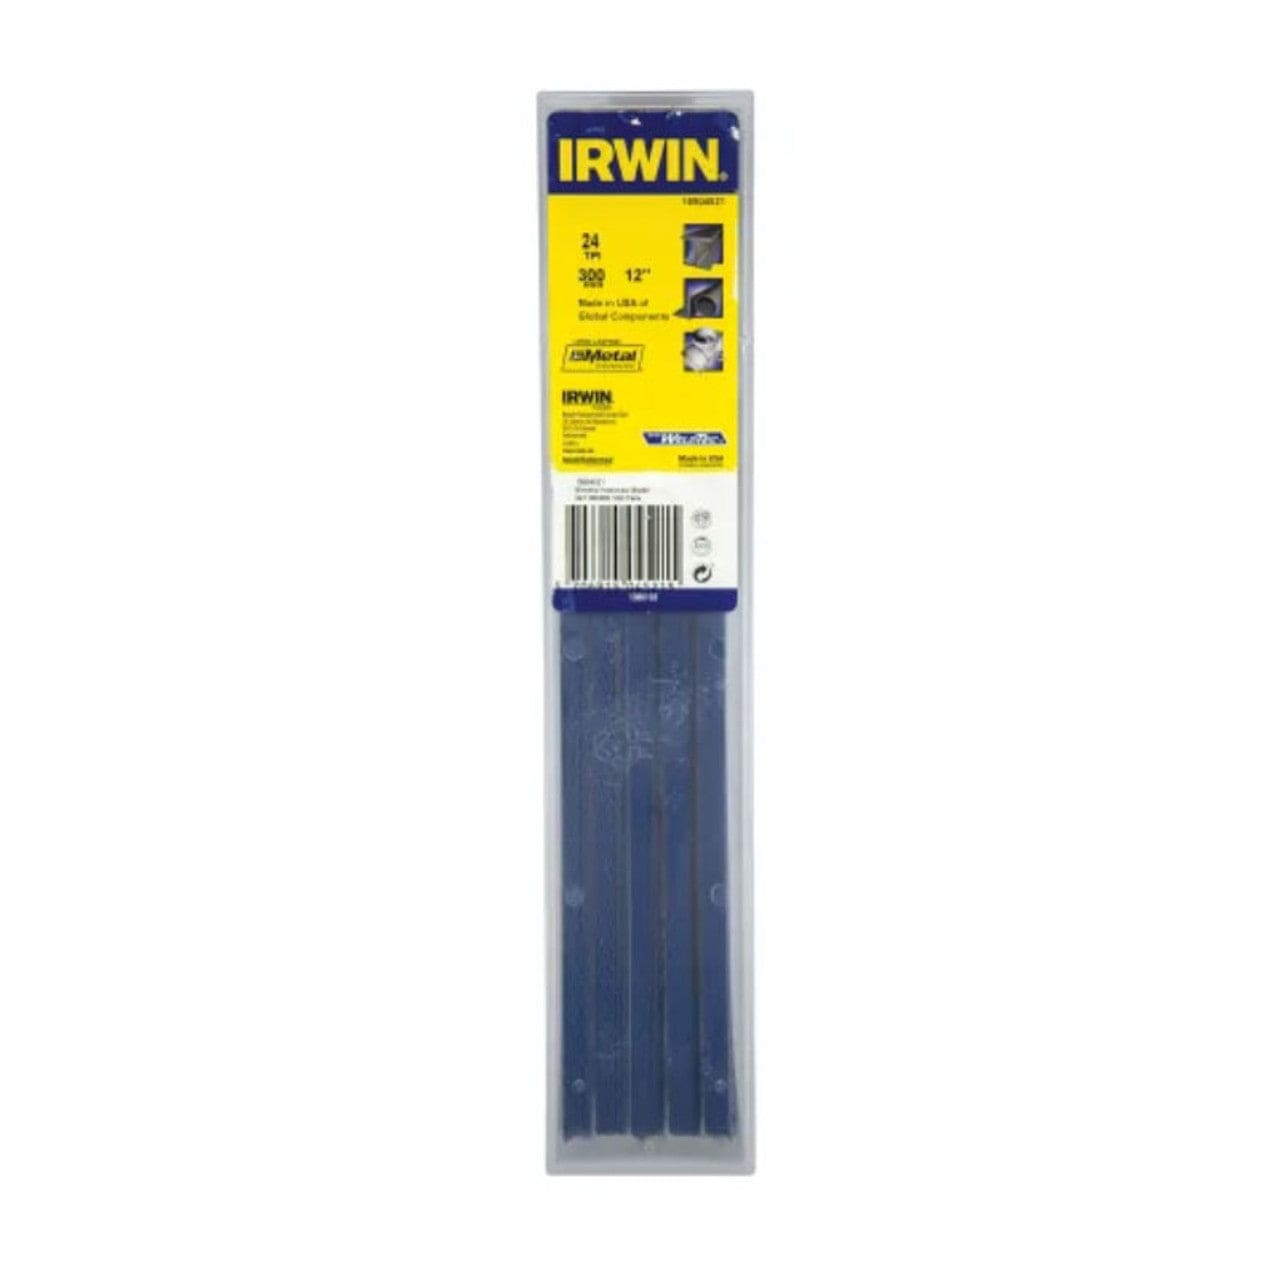 Irwin 100 Pieces Bi-Metal Hacksaw Blade - 12" / 24T | Supply Master Accra, Ghana Hand Saws & Cutting Tools Buy Tools hardware Building materials